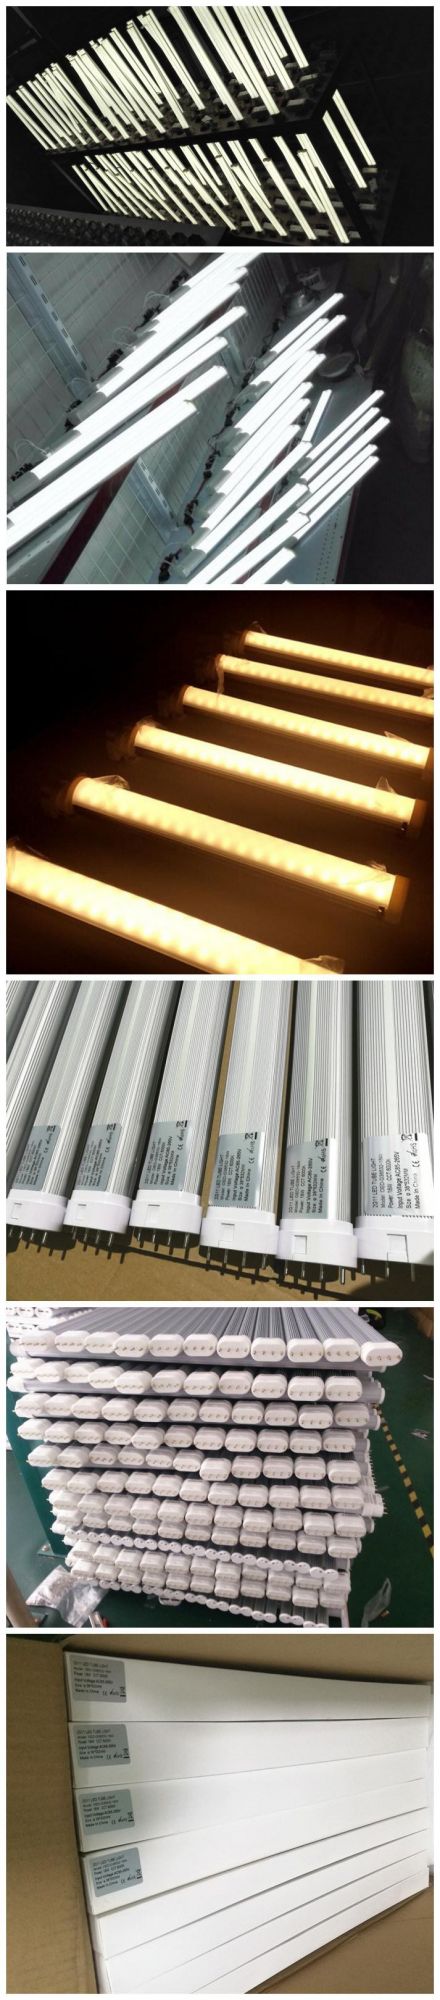 Shenzhen Factory 22W 2200lm 2g11 LED Bulb Light Tube with 4 Pins 2g11 Lamp